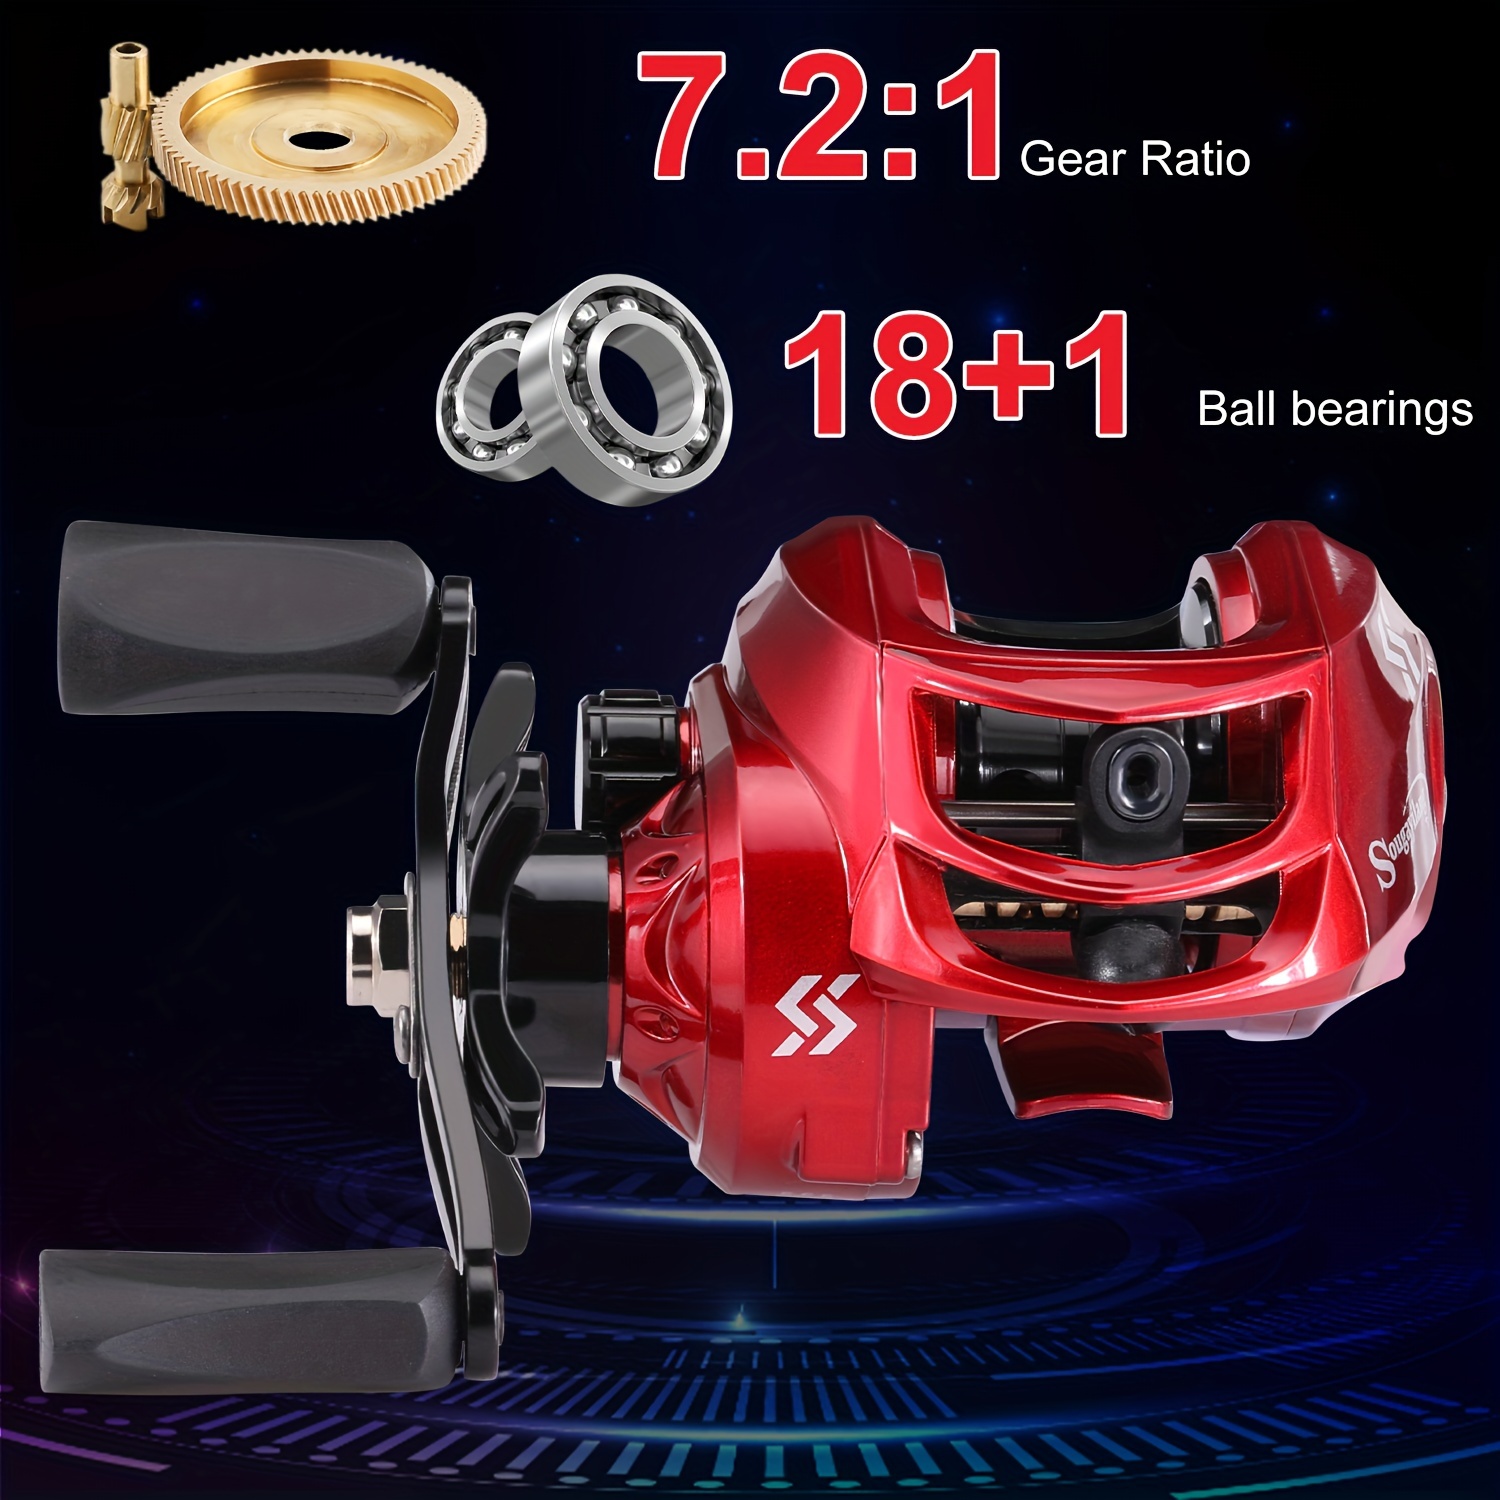 Sougayilang 1pc 7.2:1 Gear Ratio Aluminum Baitcasting Reel, Green Fishing  Reel With Magnetic Brake System For Freshwater